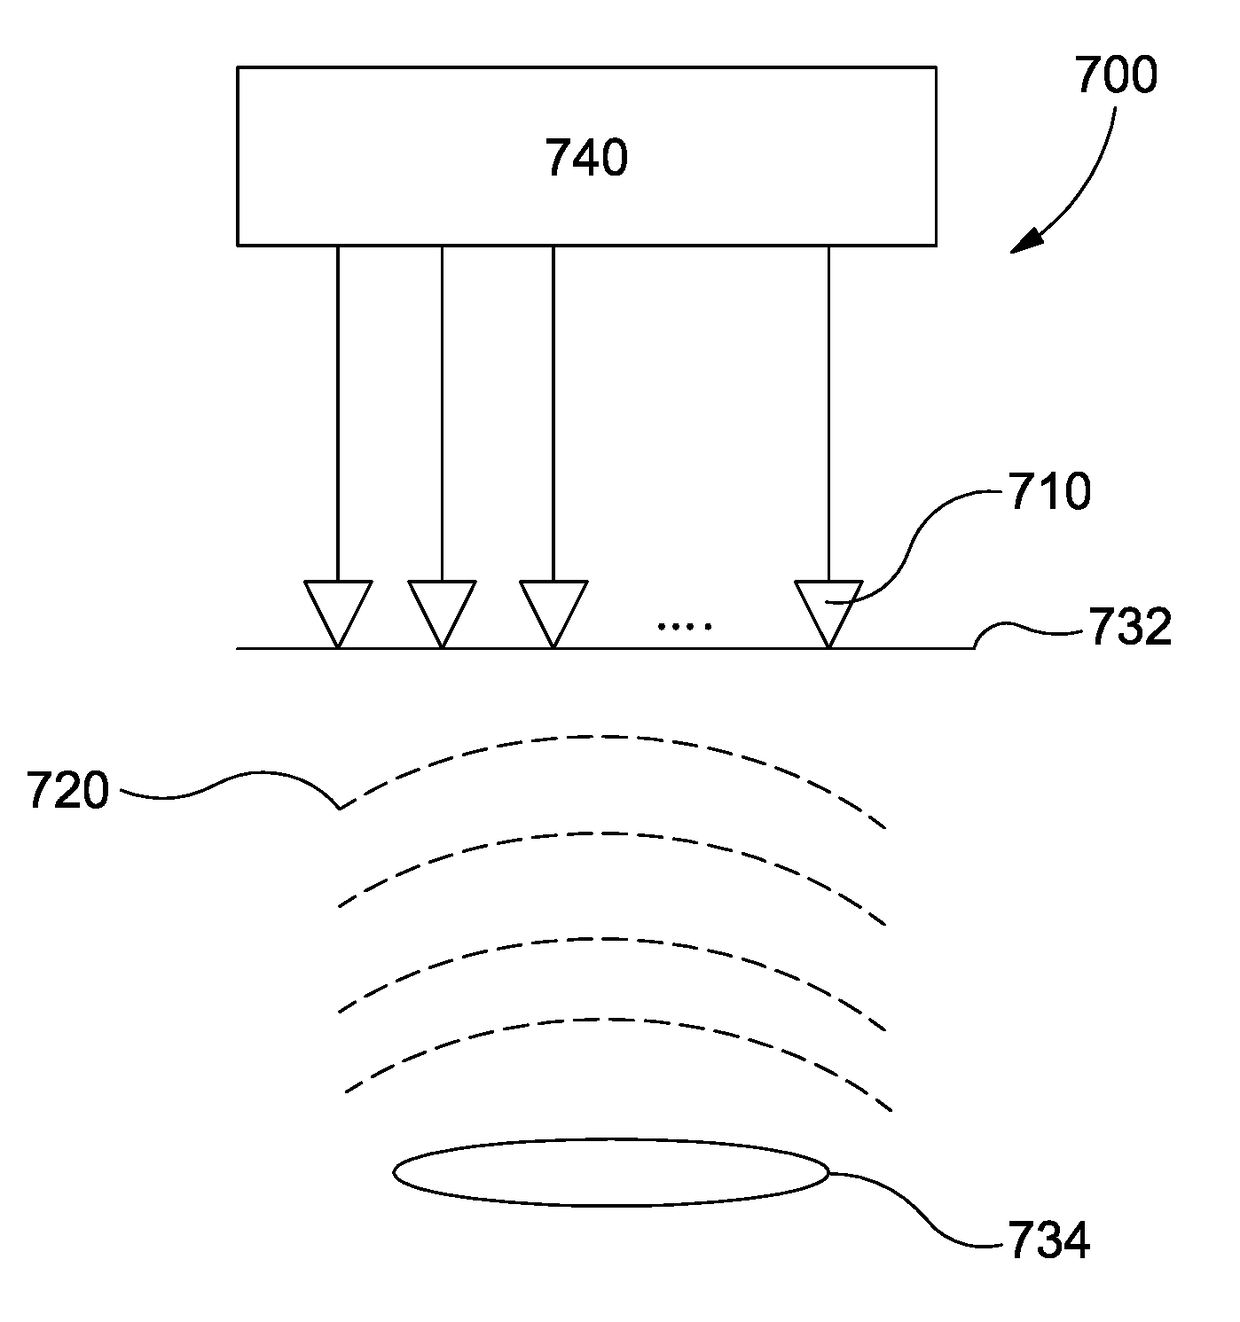 Method, system and non-transitory computer-readable medium for forming a seismic image of a geological structure